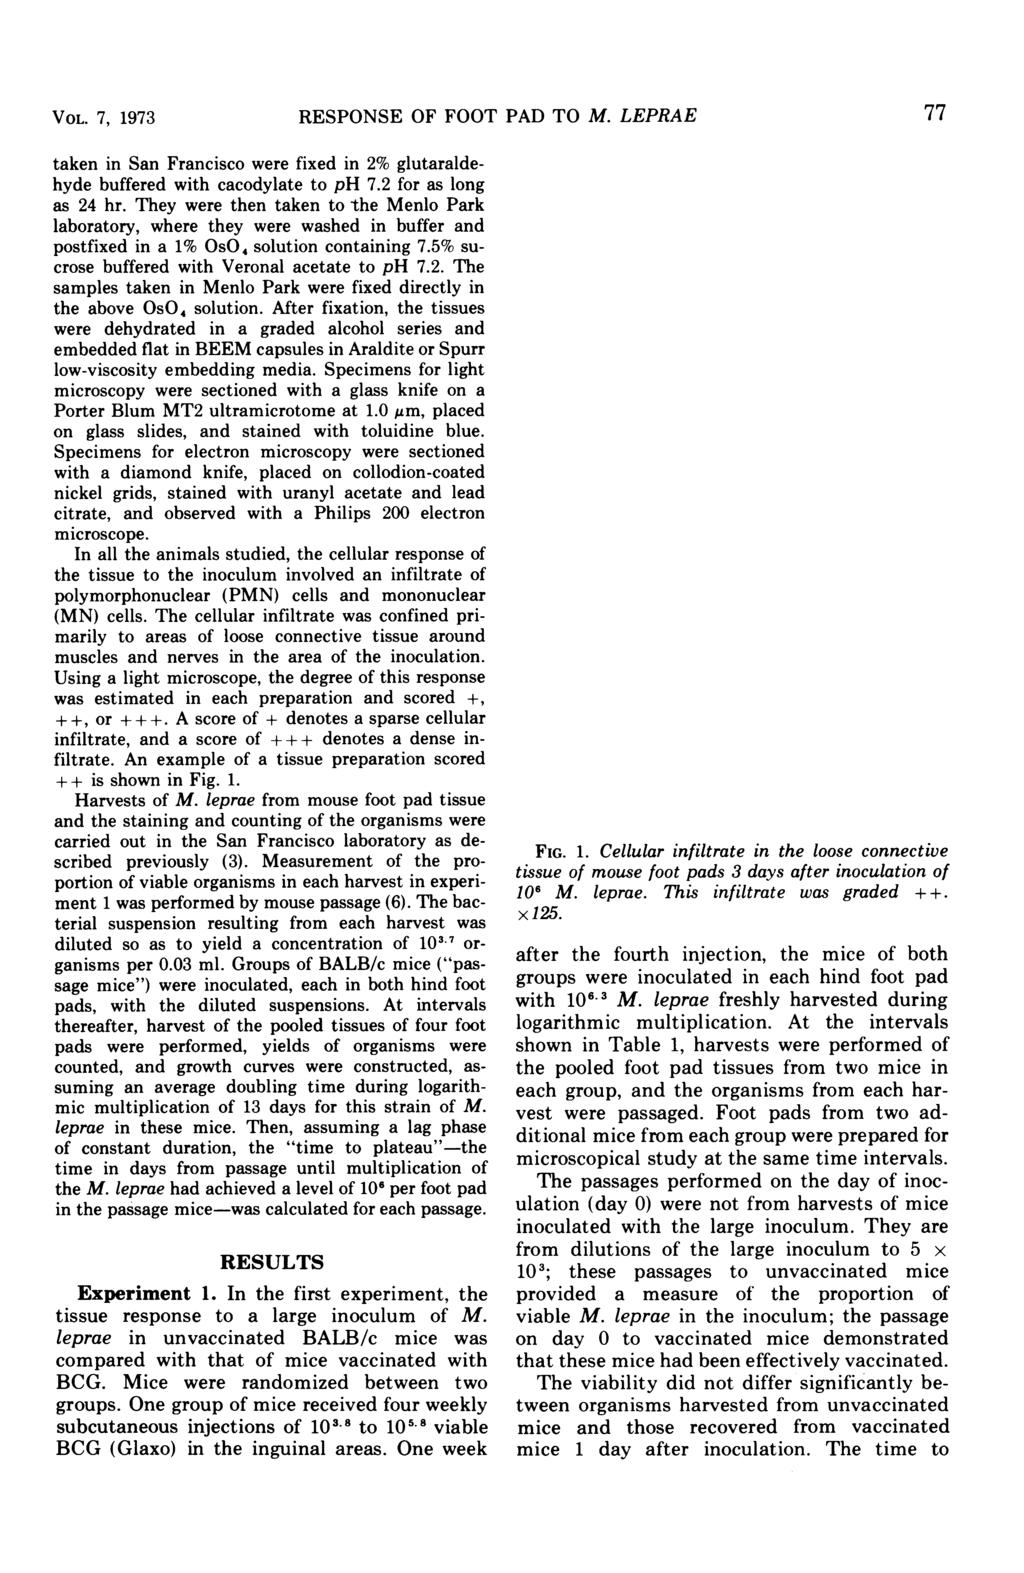 VOL. 7, 1973 RESPONSE OF FOOT PAD TO M. LEPRAE 77 taken in San Francisco were fixed in 2% glutaraldehyde buffered with cacodylate to ph 7.2 for as long as 24 hr.